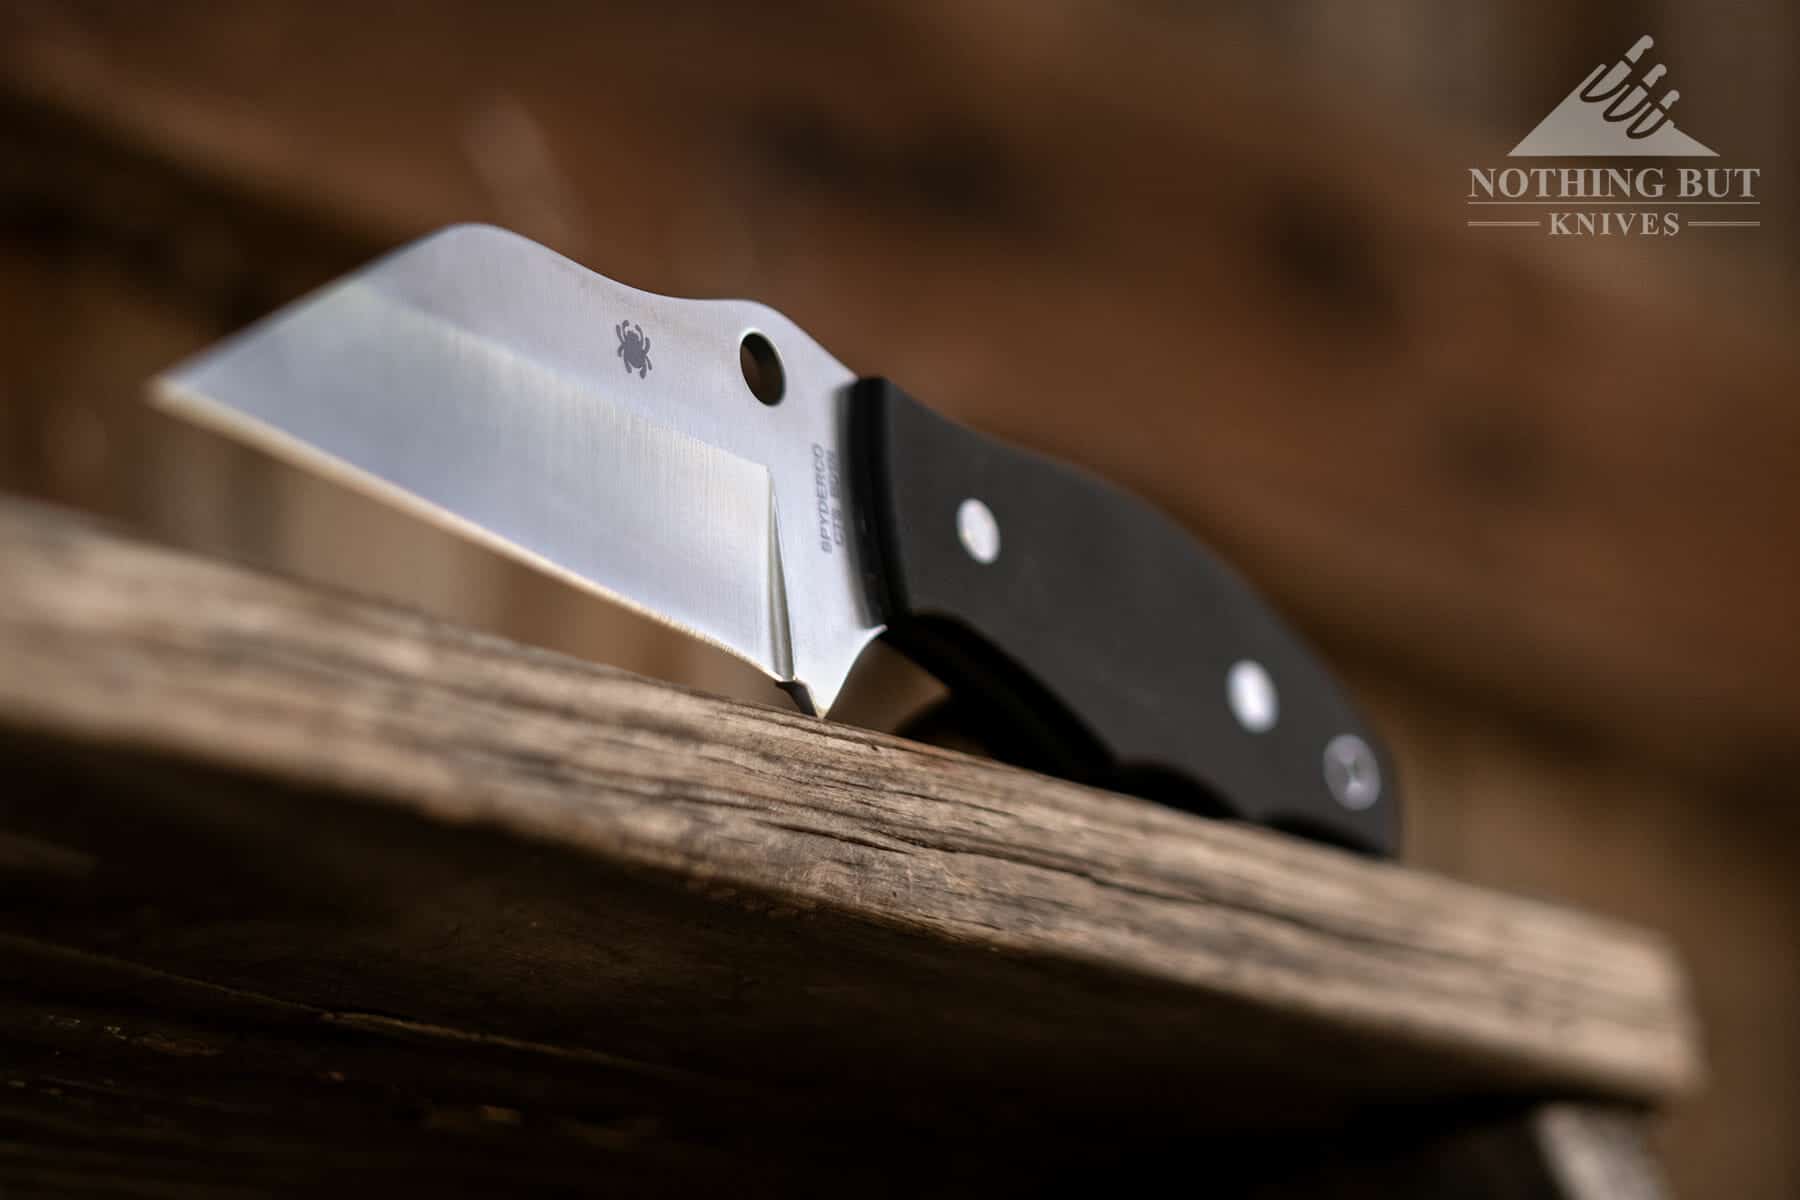 The Ronin 2 is a practical size and weight for EDC.